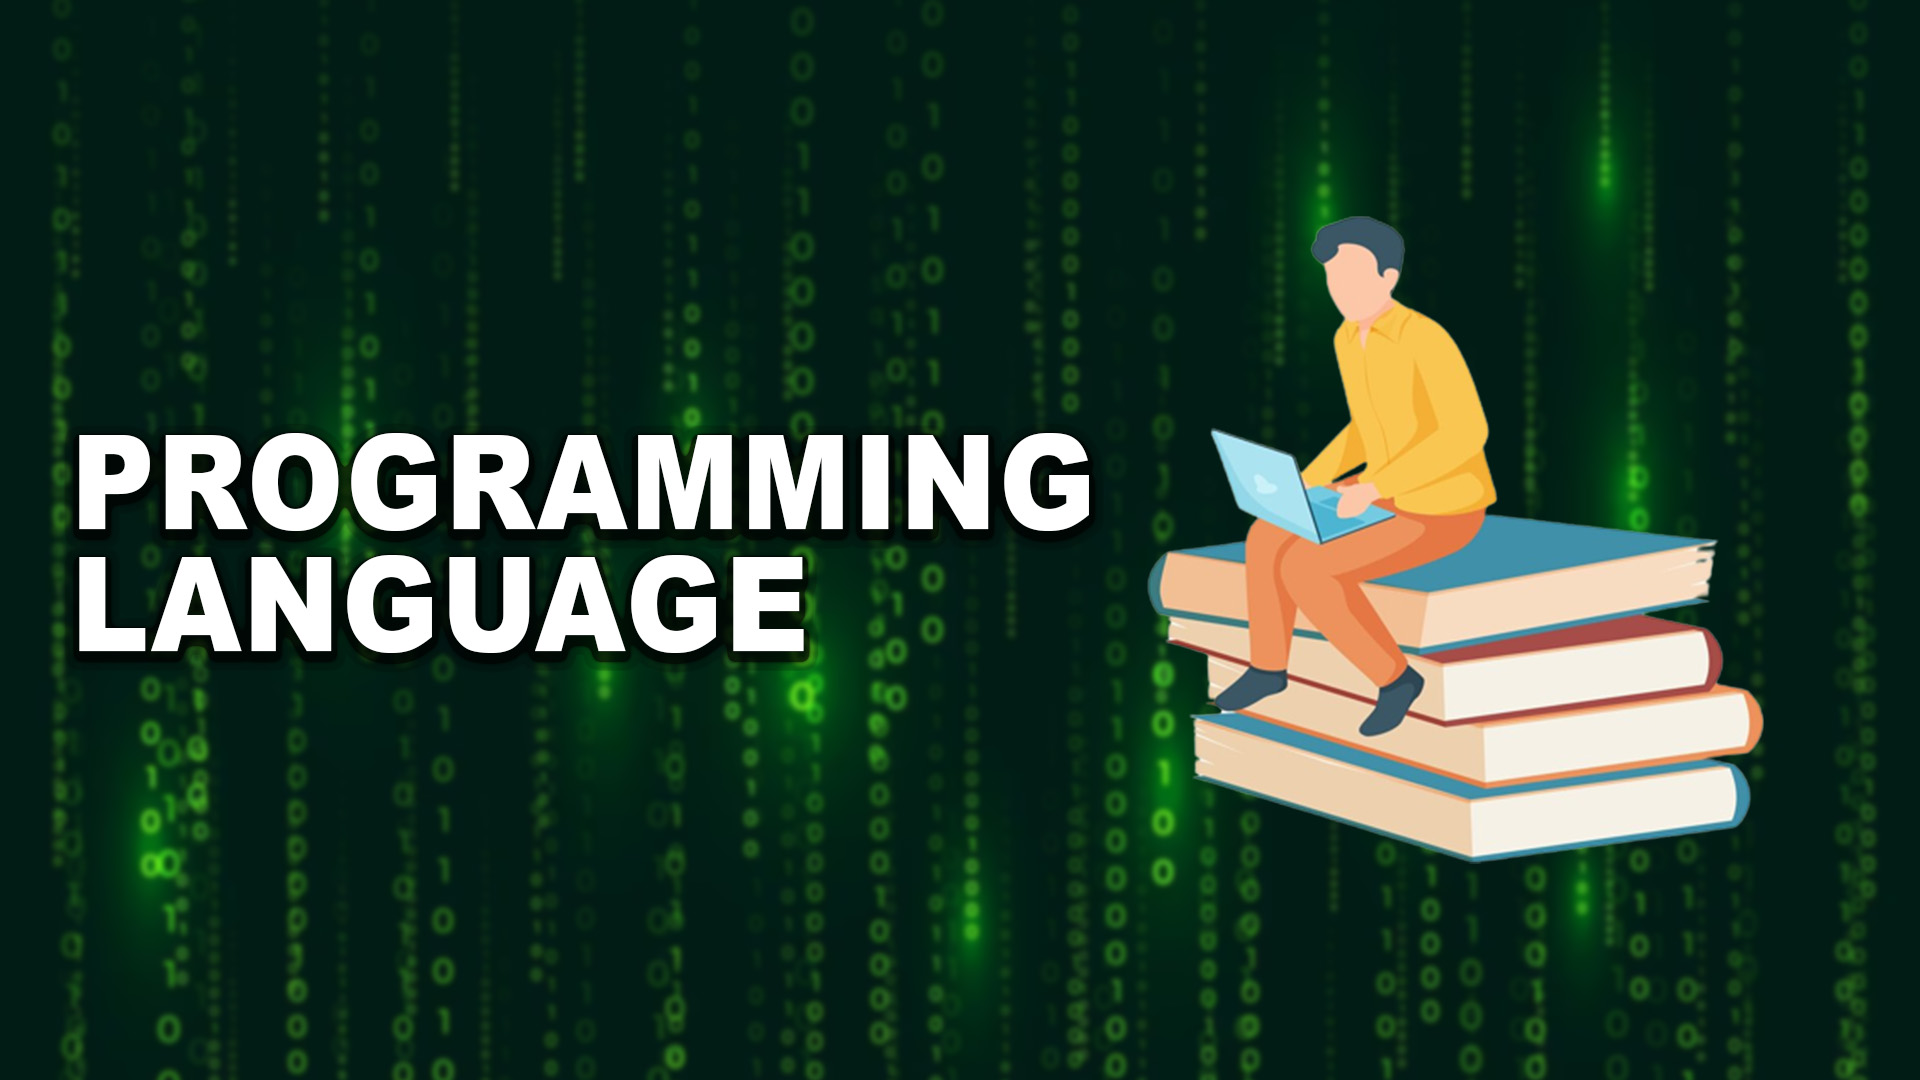 Human-Readable Code: Is Branding Programming Language for Humans?